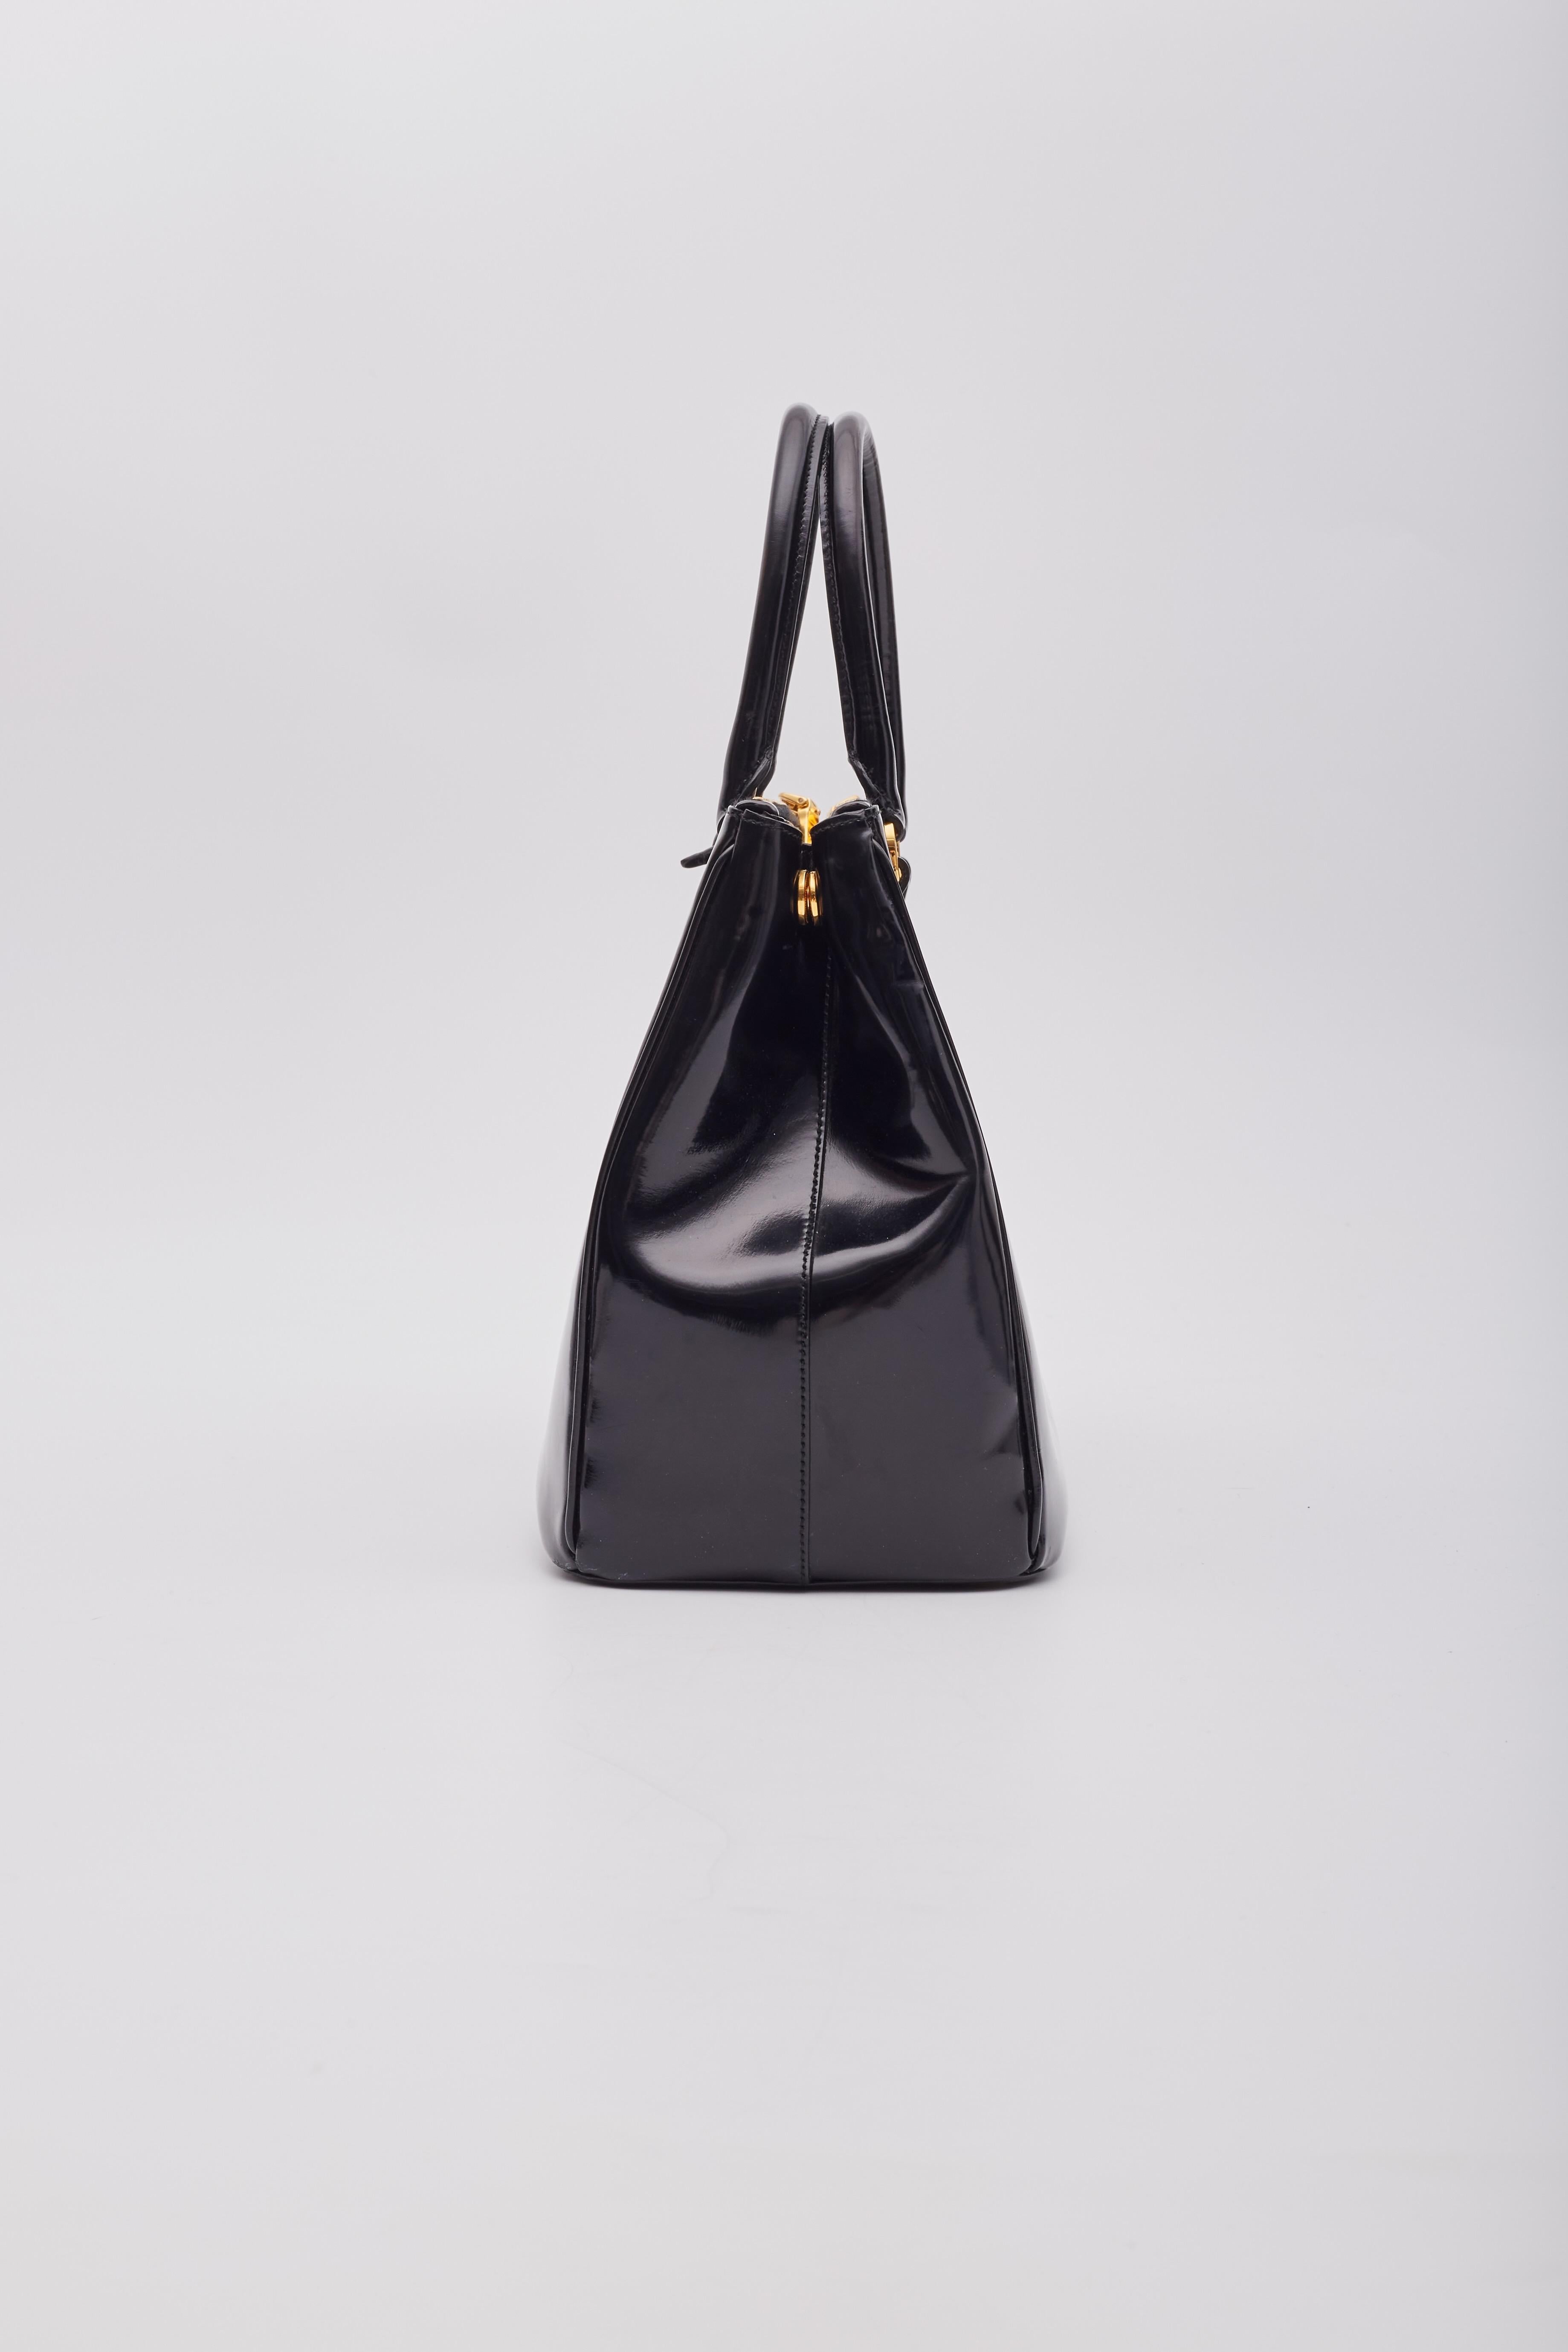 Prada Black Patent Leather Galleria Tote Bag In Good Condition For Sale In Montreal, Quebec